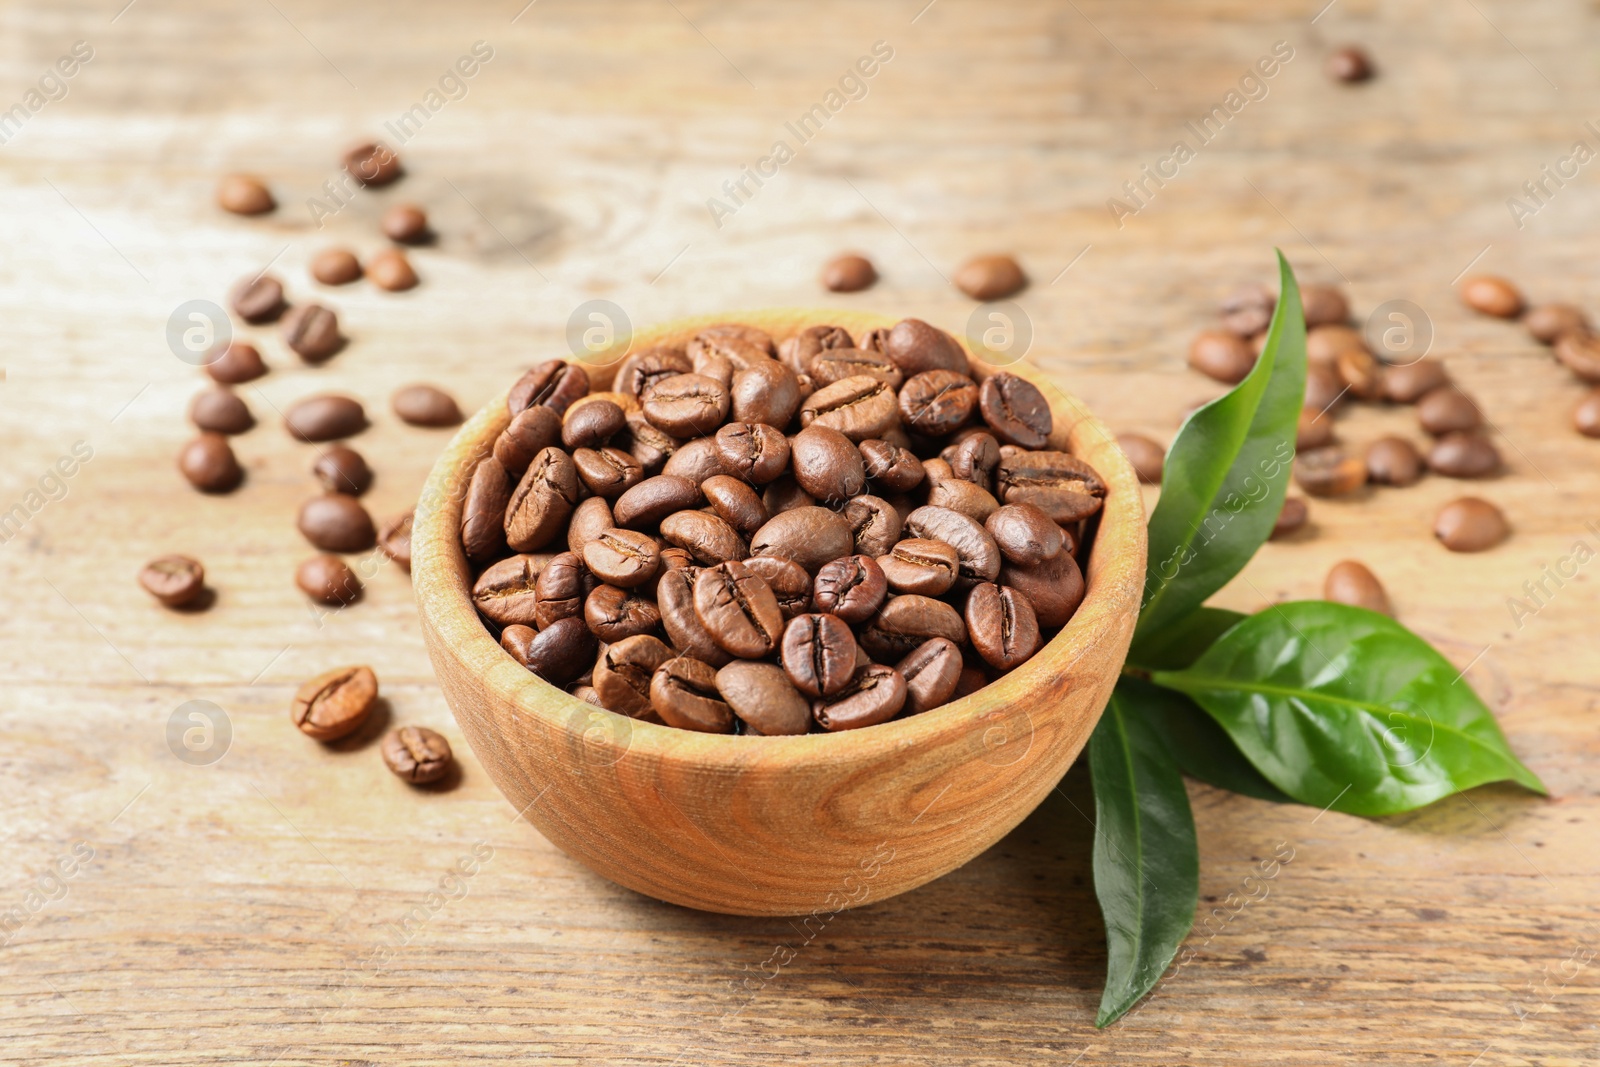 Photo of Bowl of coffee beans and fresh green leaves on wooden table